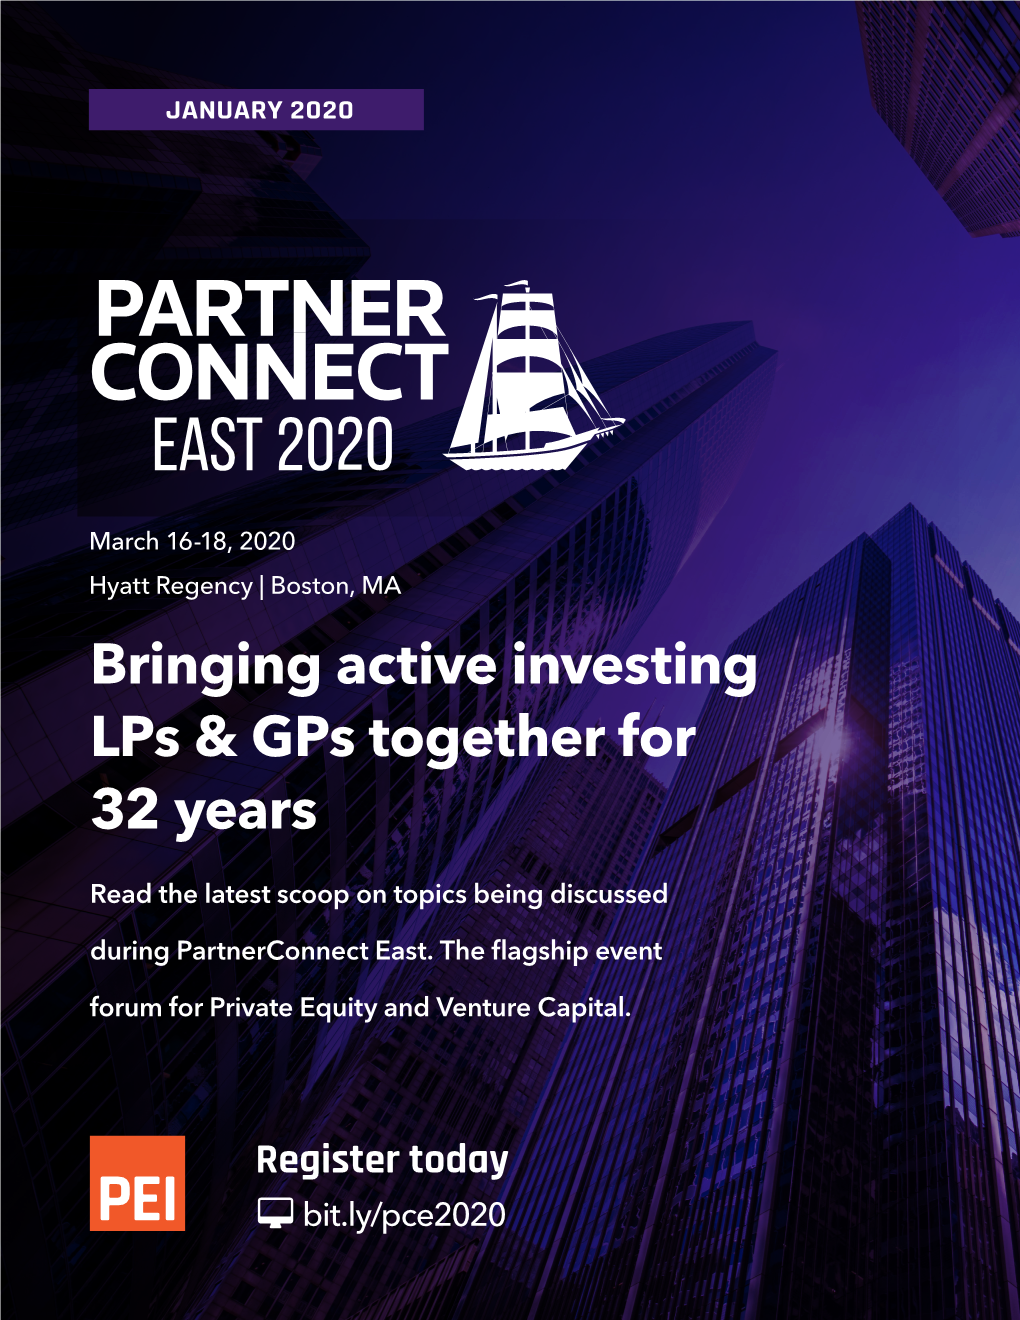 Bringing Active Investing Lps & Gps Together for 32 Years